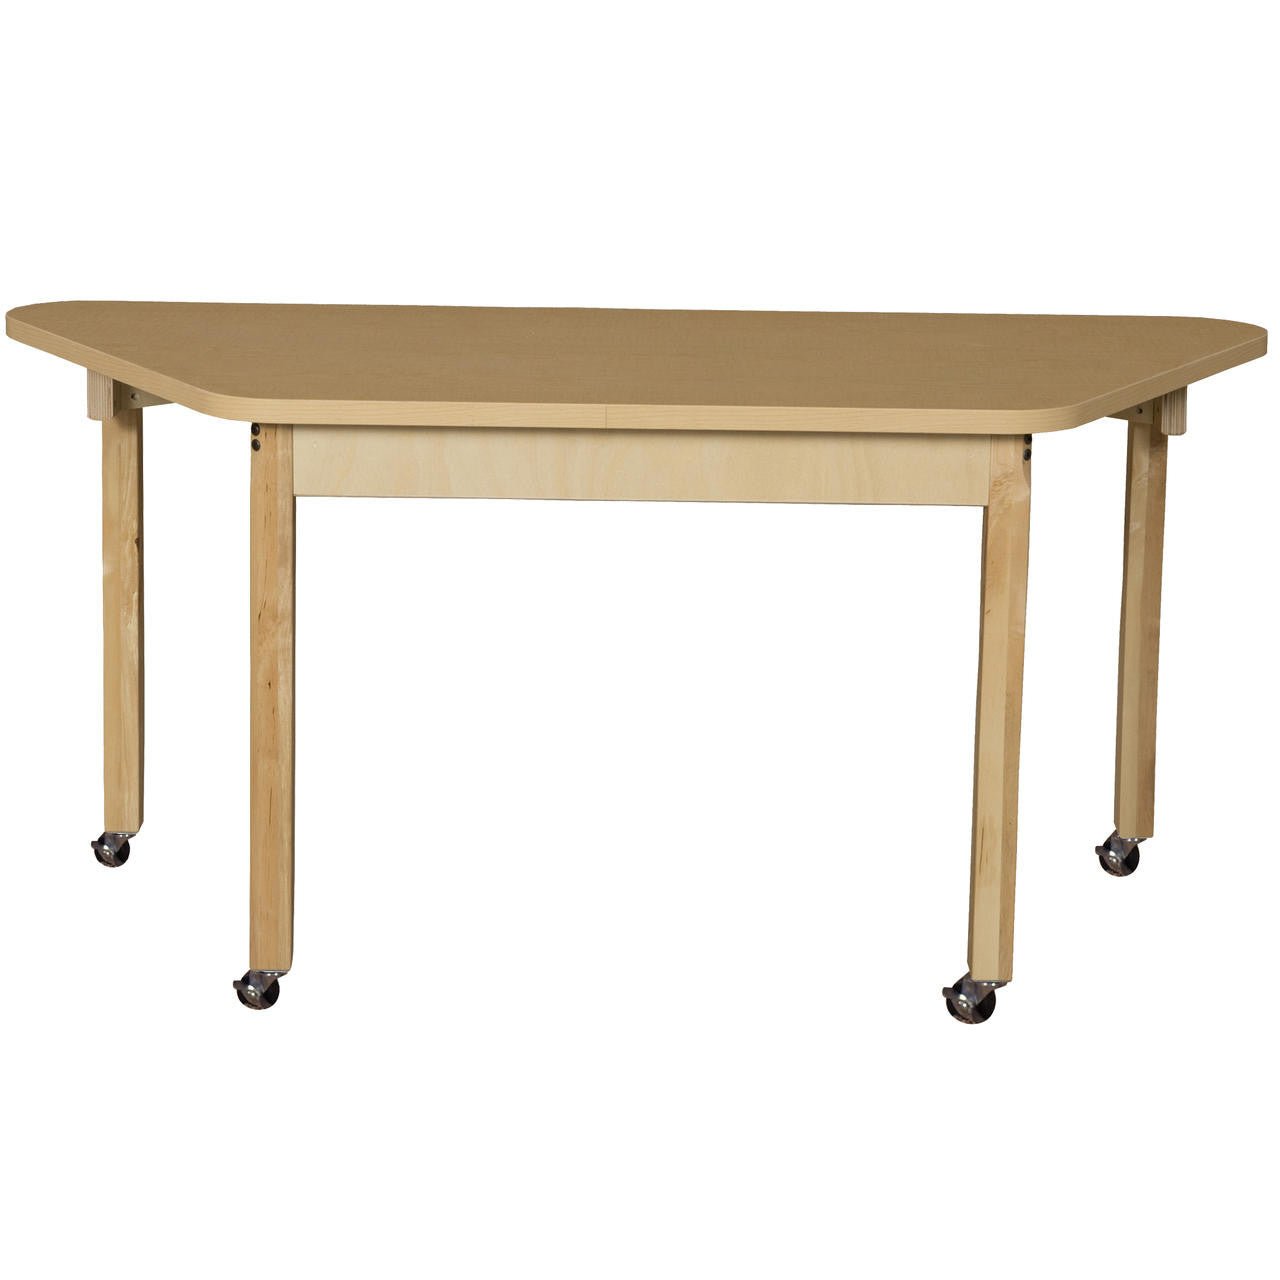 Mobile Trapezoidal High Pressure Laminate Table with Hardwood Legs-29